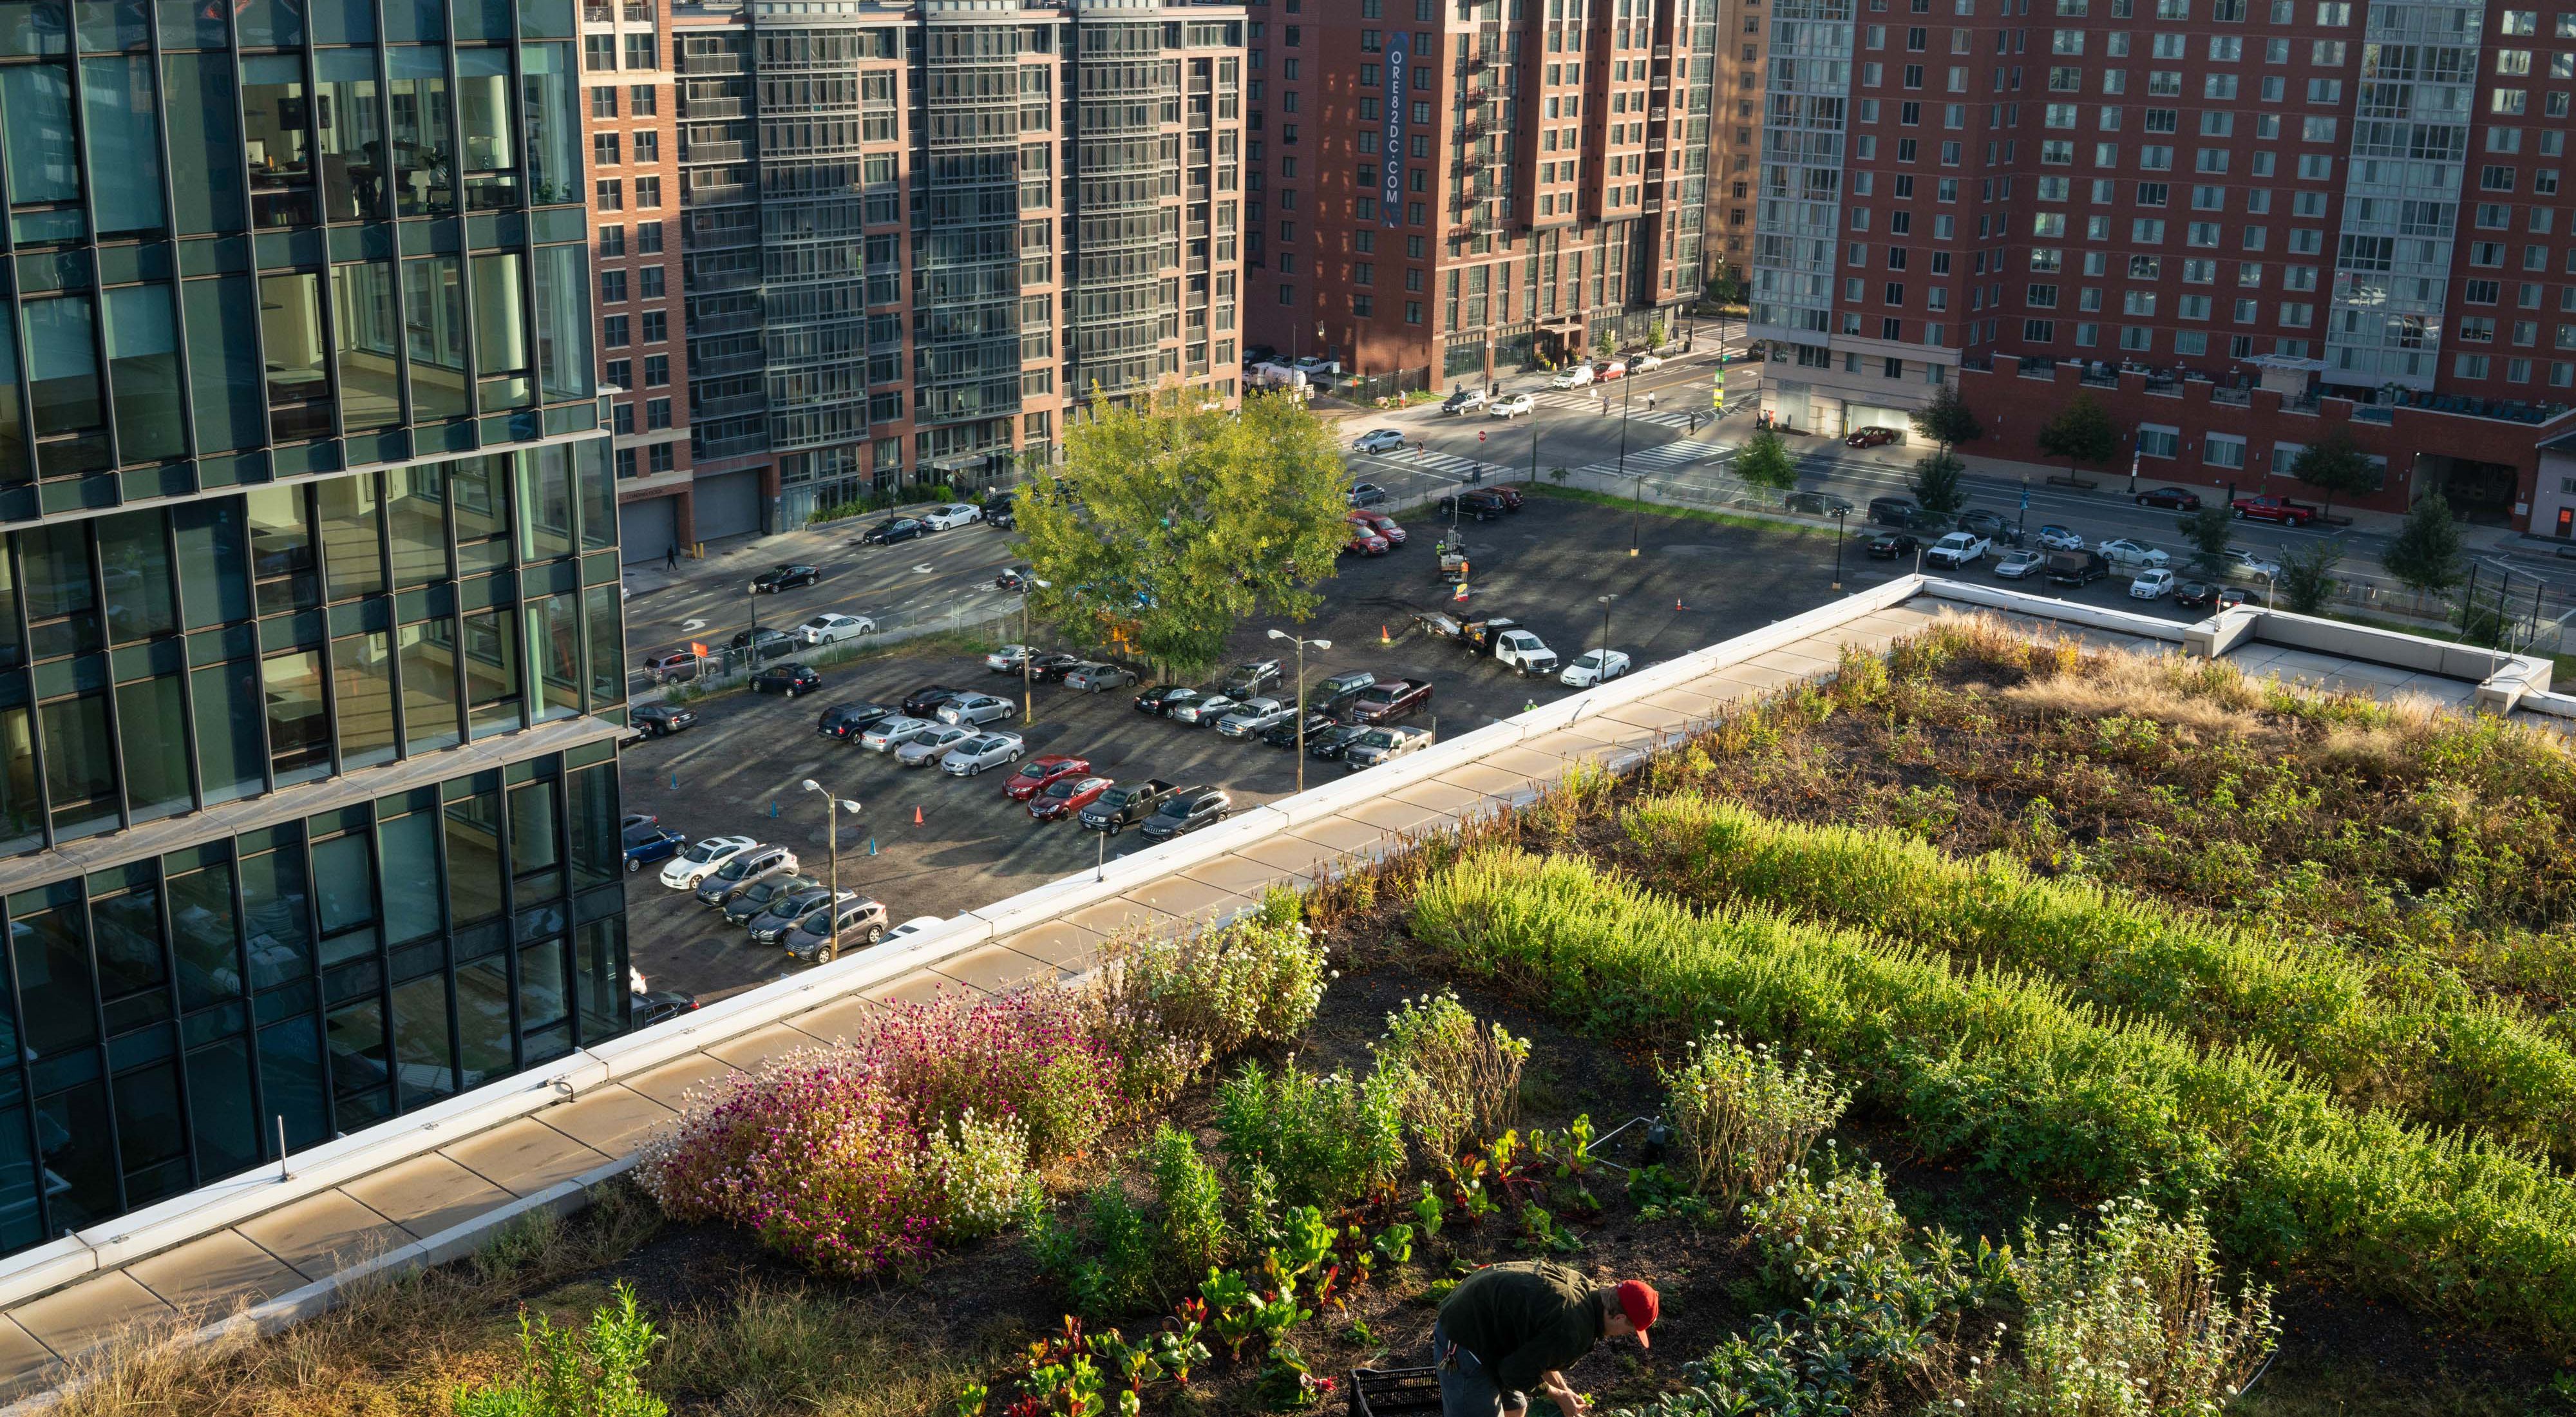 View from a rooftop garden in Washington, DC. A vegetable garden grows on top of a high rise building. The surrounding buildings have glass, steel and brick facades. 